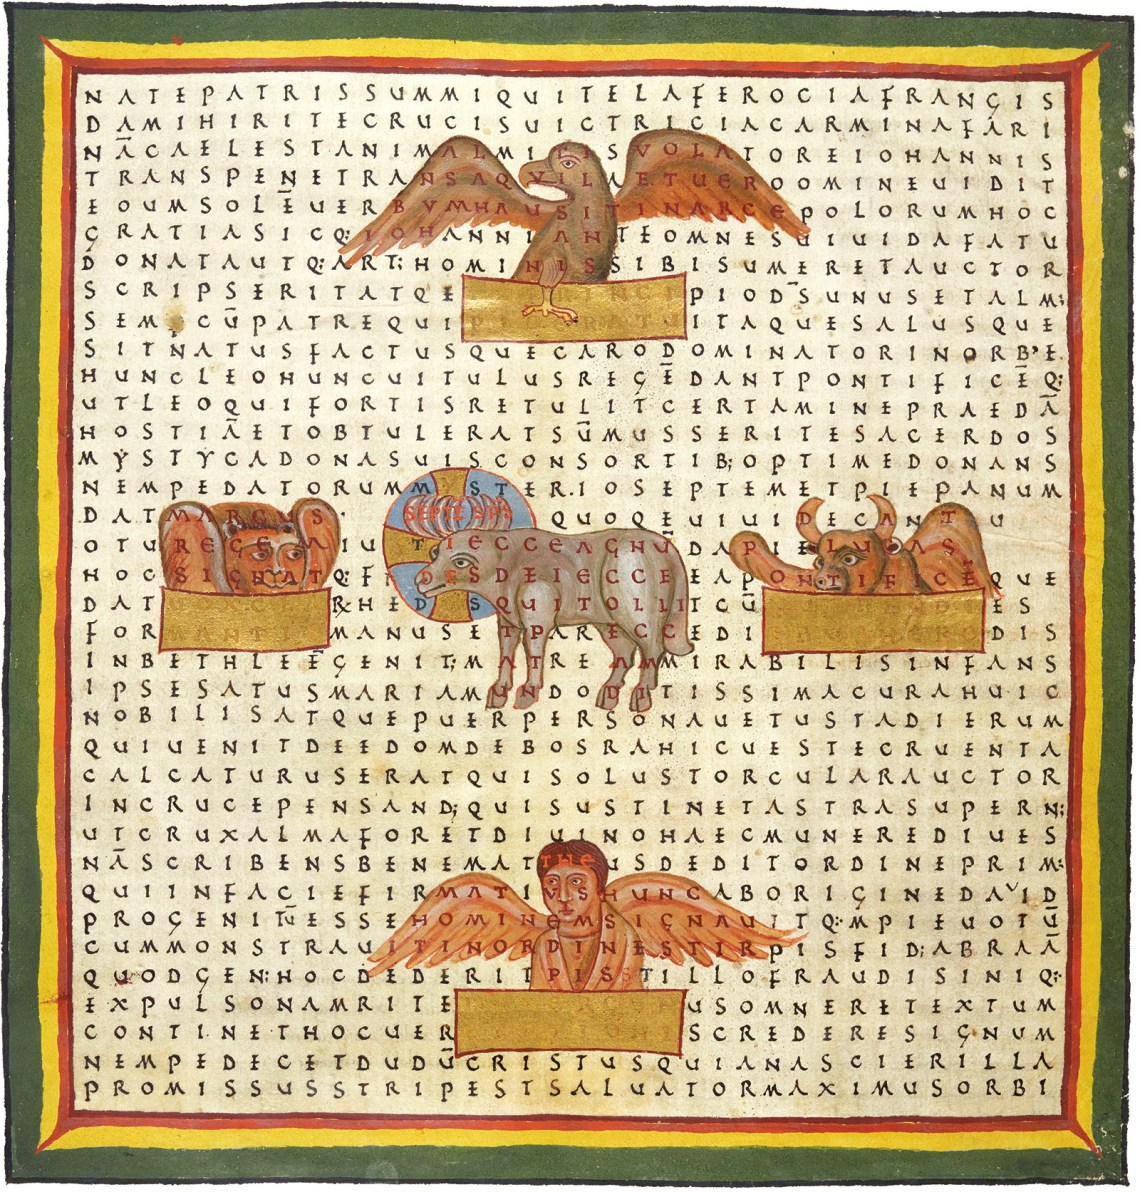 grid poem by Hrabanus Maurus showing the Evangelists and the Lamb of God